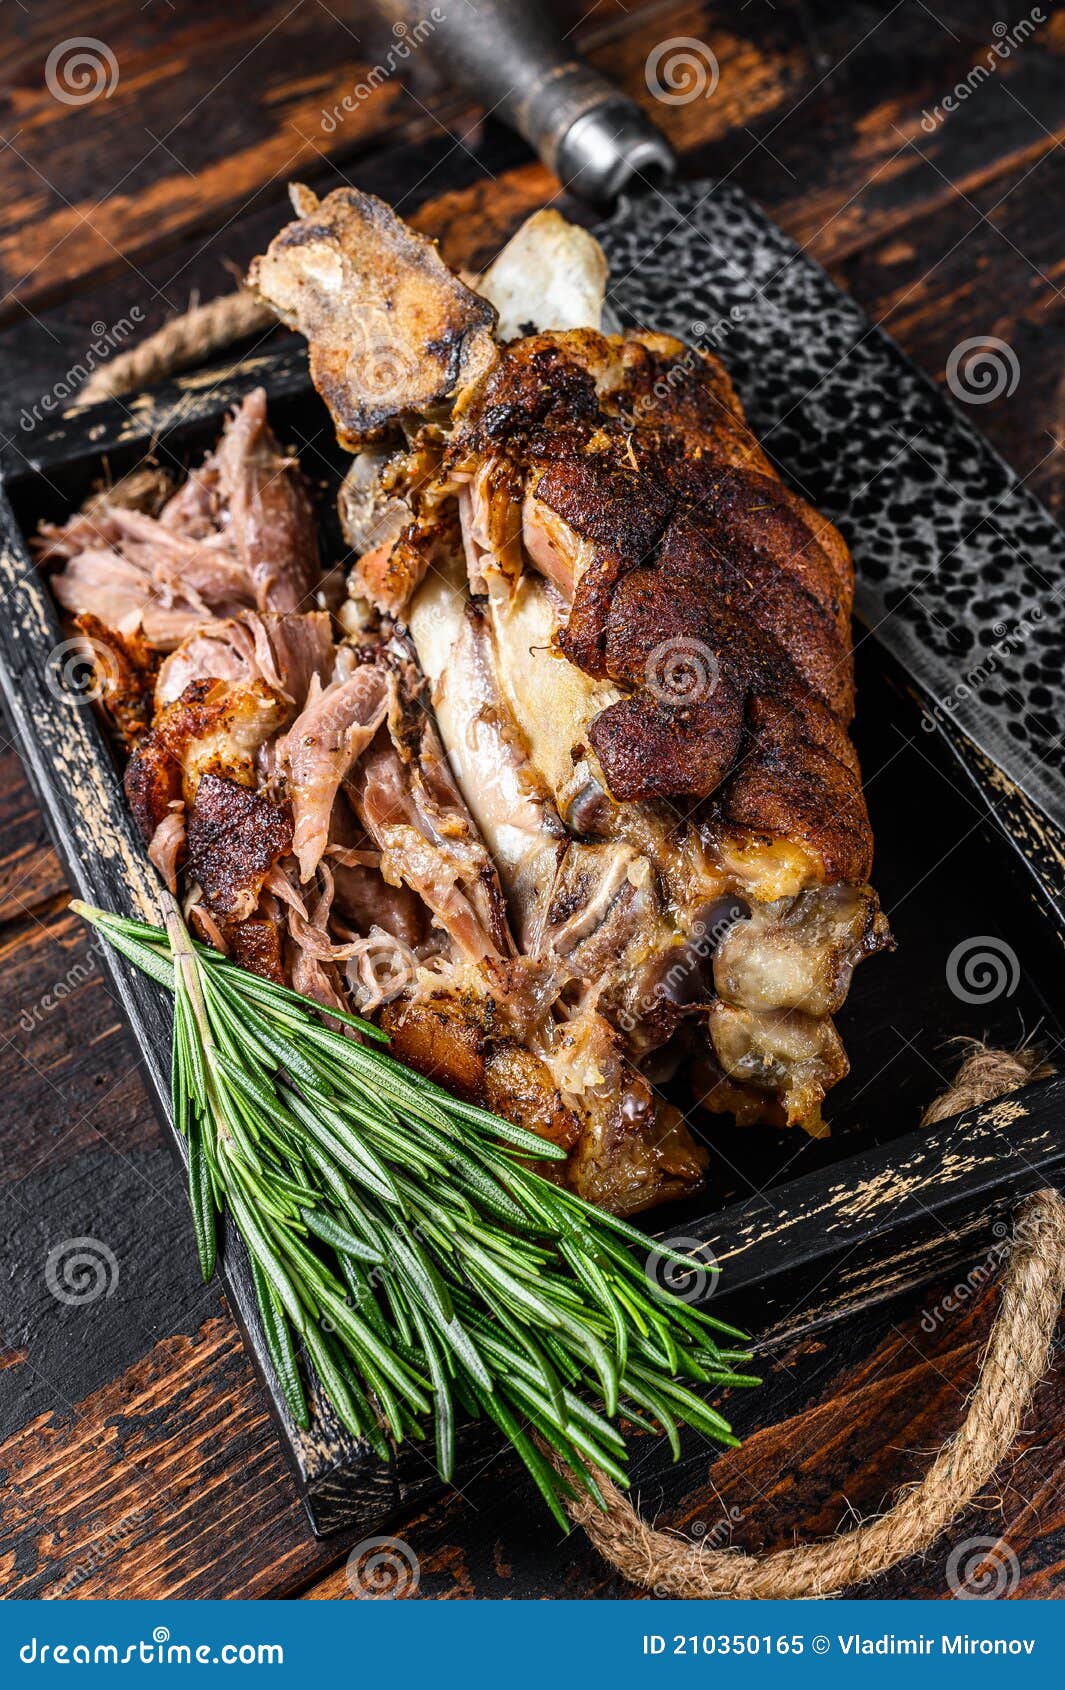 Roasted Pork Knuckle Eisbein Meat in a Wooden Tray with Knife. Dark ...